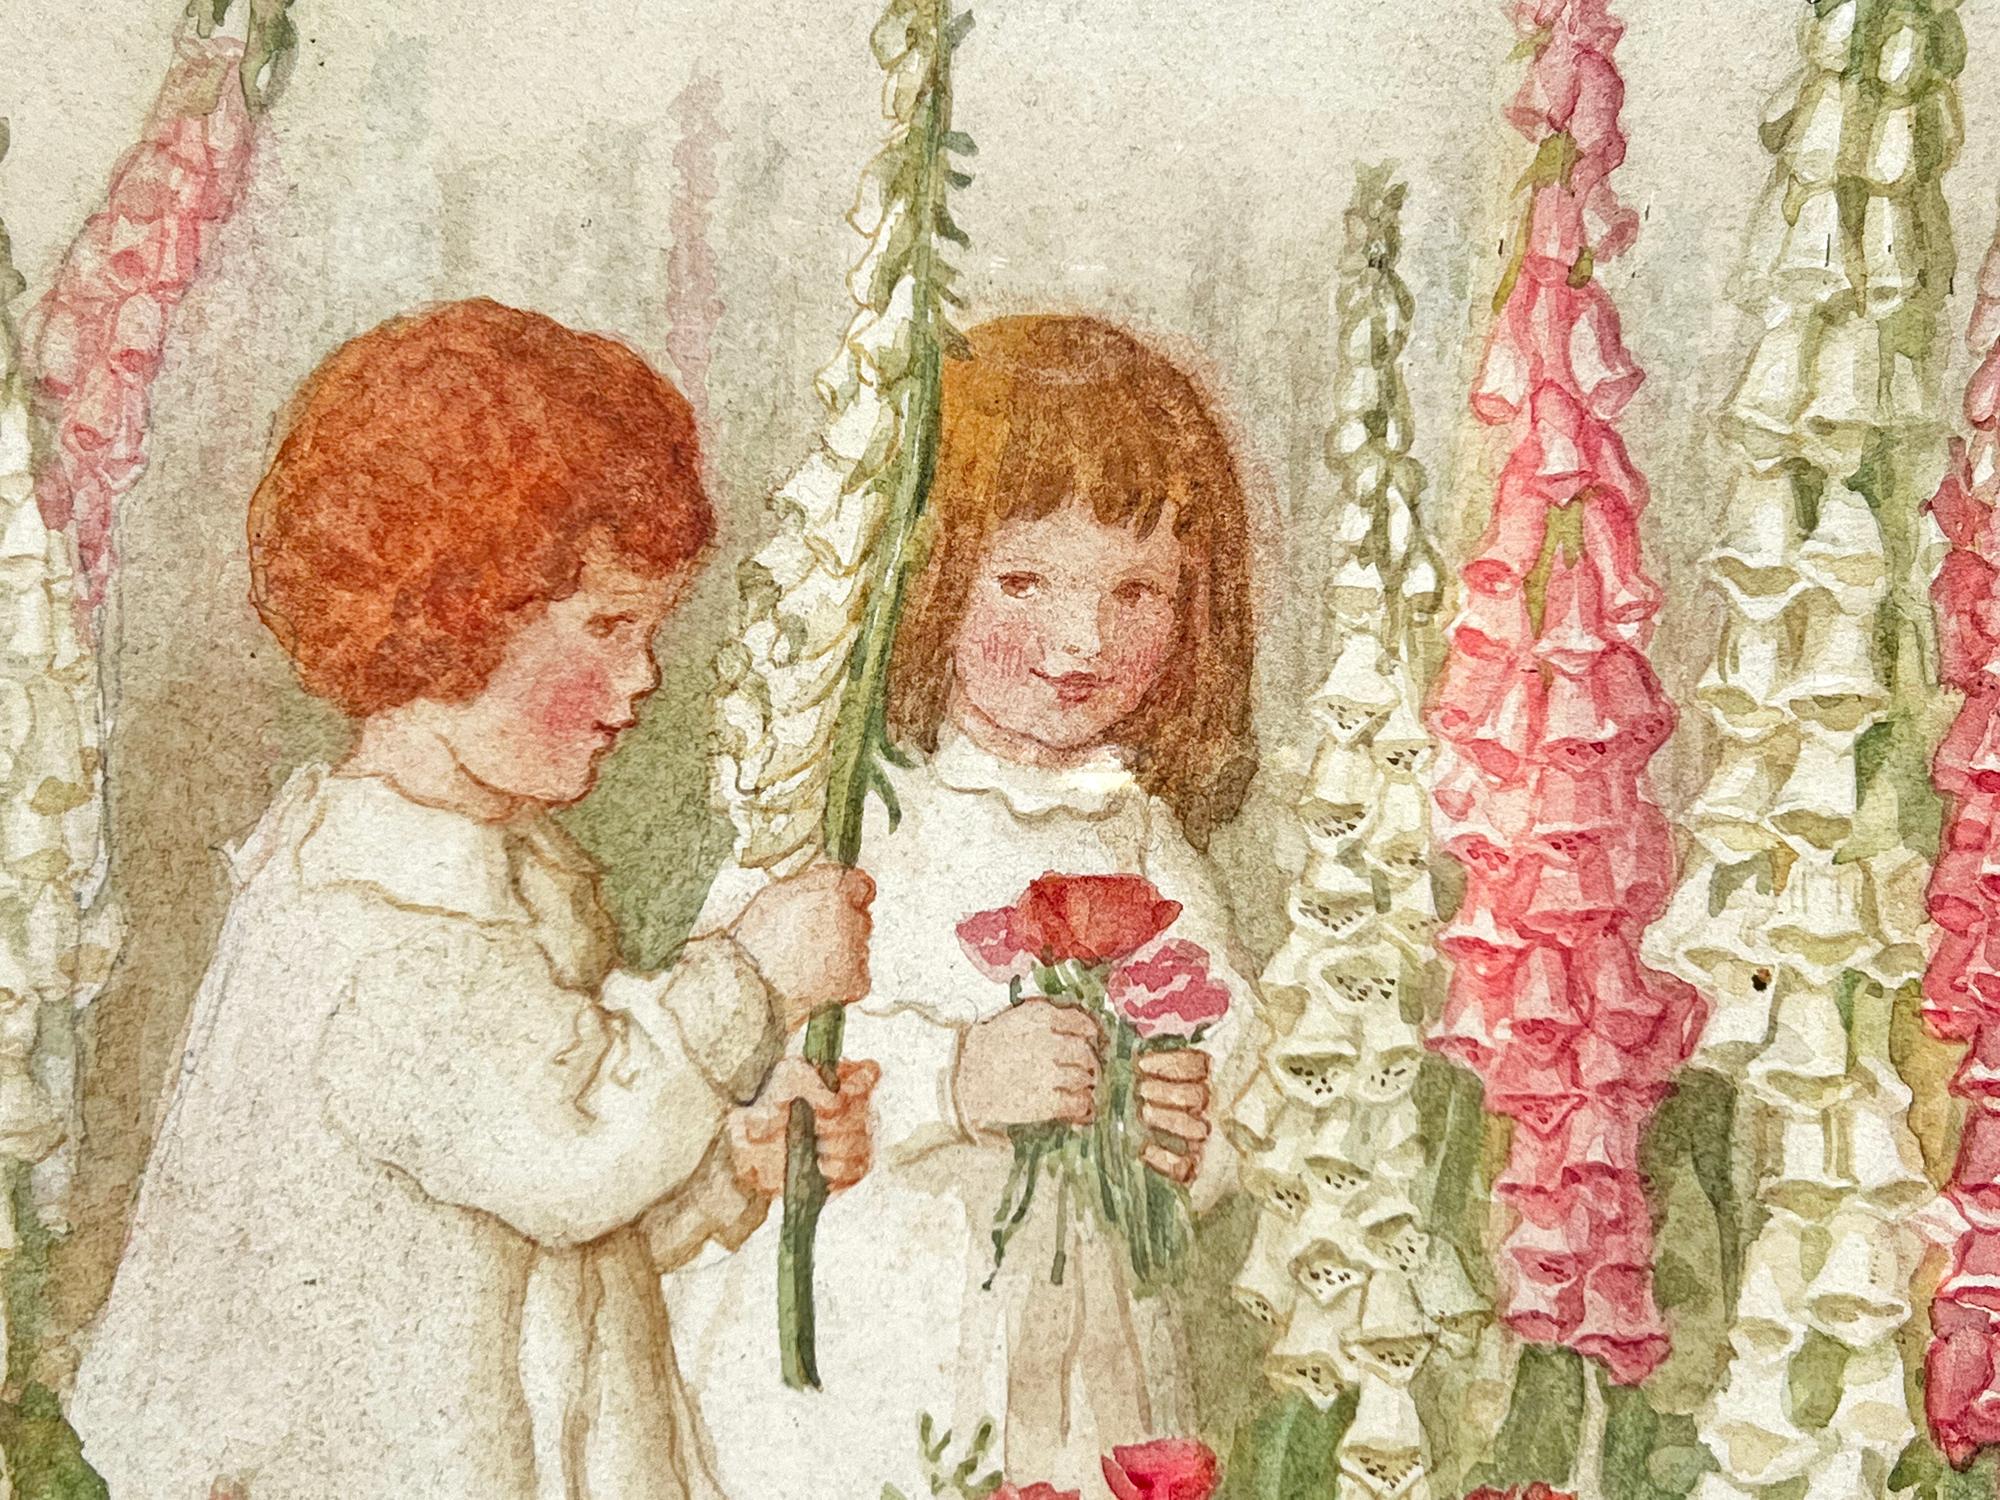 Children Amongst Foxgloves - Pink Flowers, Female Illustrator of The Golden Age - Art by Amelia Bauerle  ( Bowerley ) 